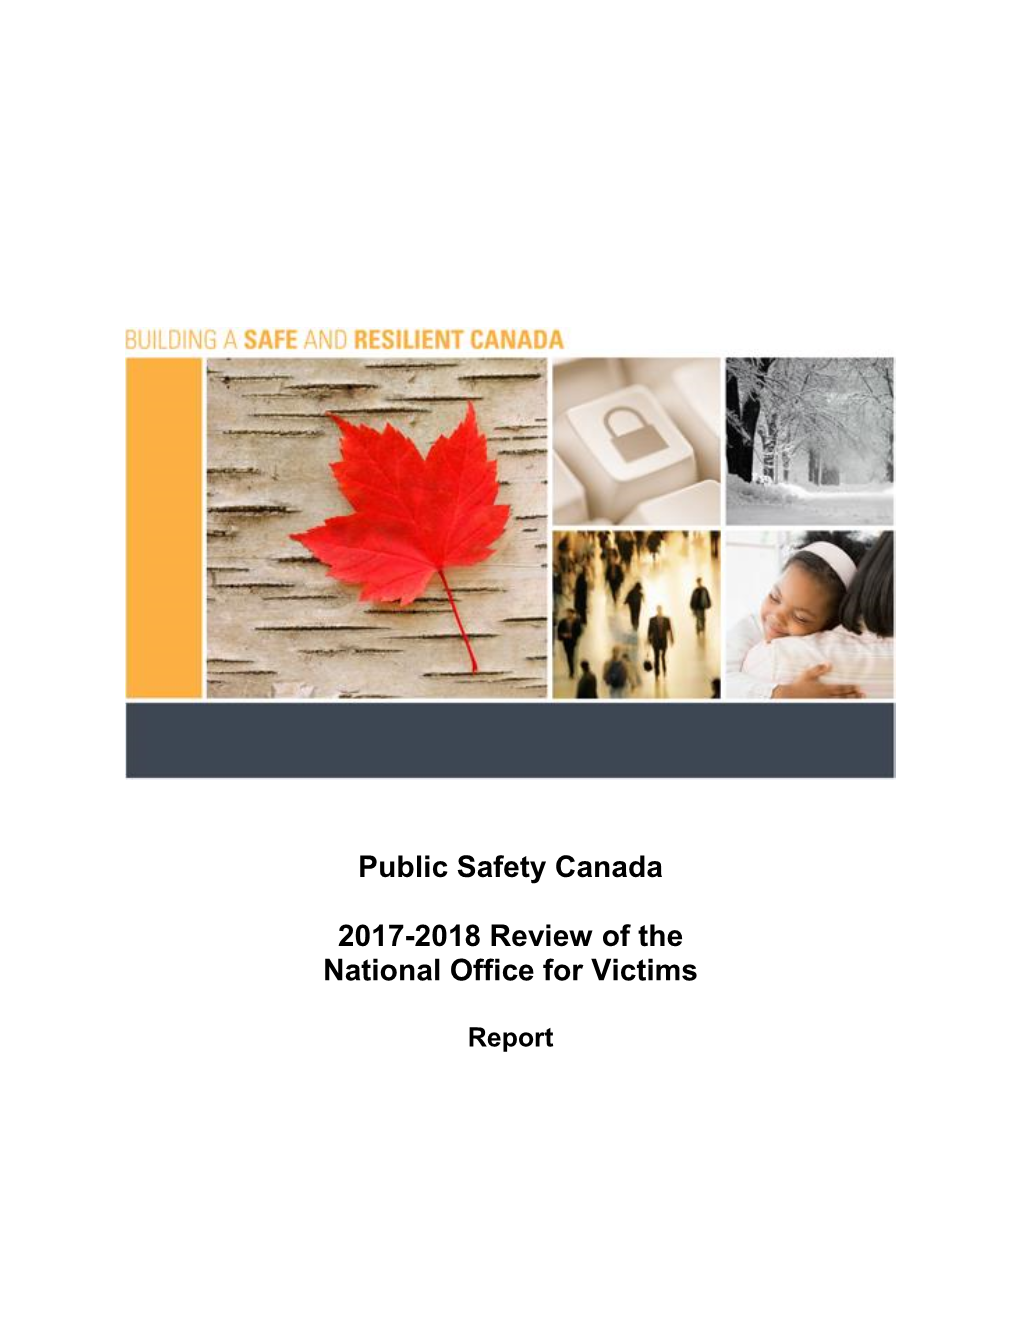 Public Safety Canada 2017-2018 Review of the National Office For